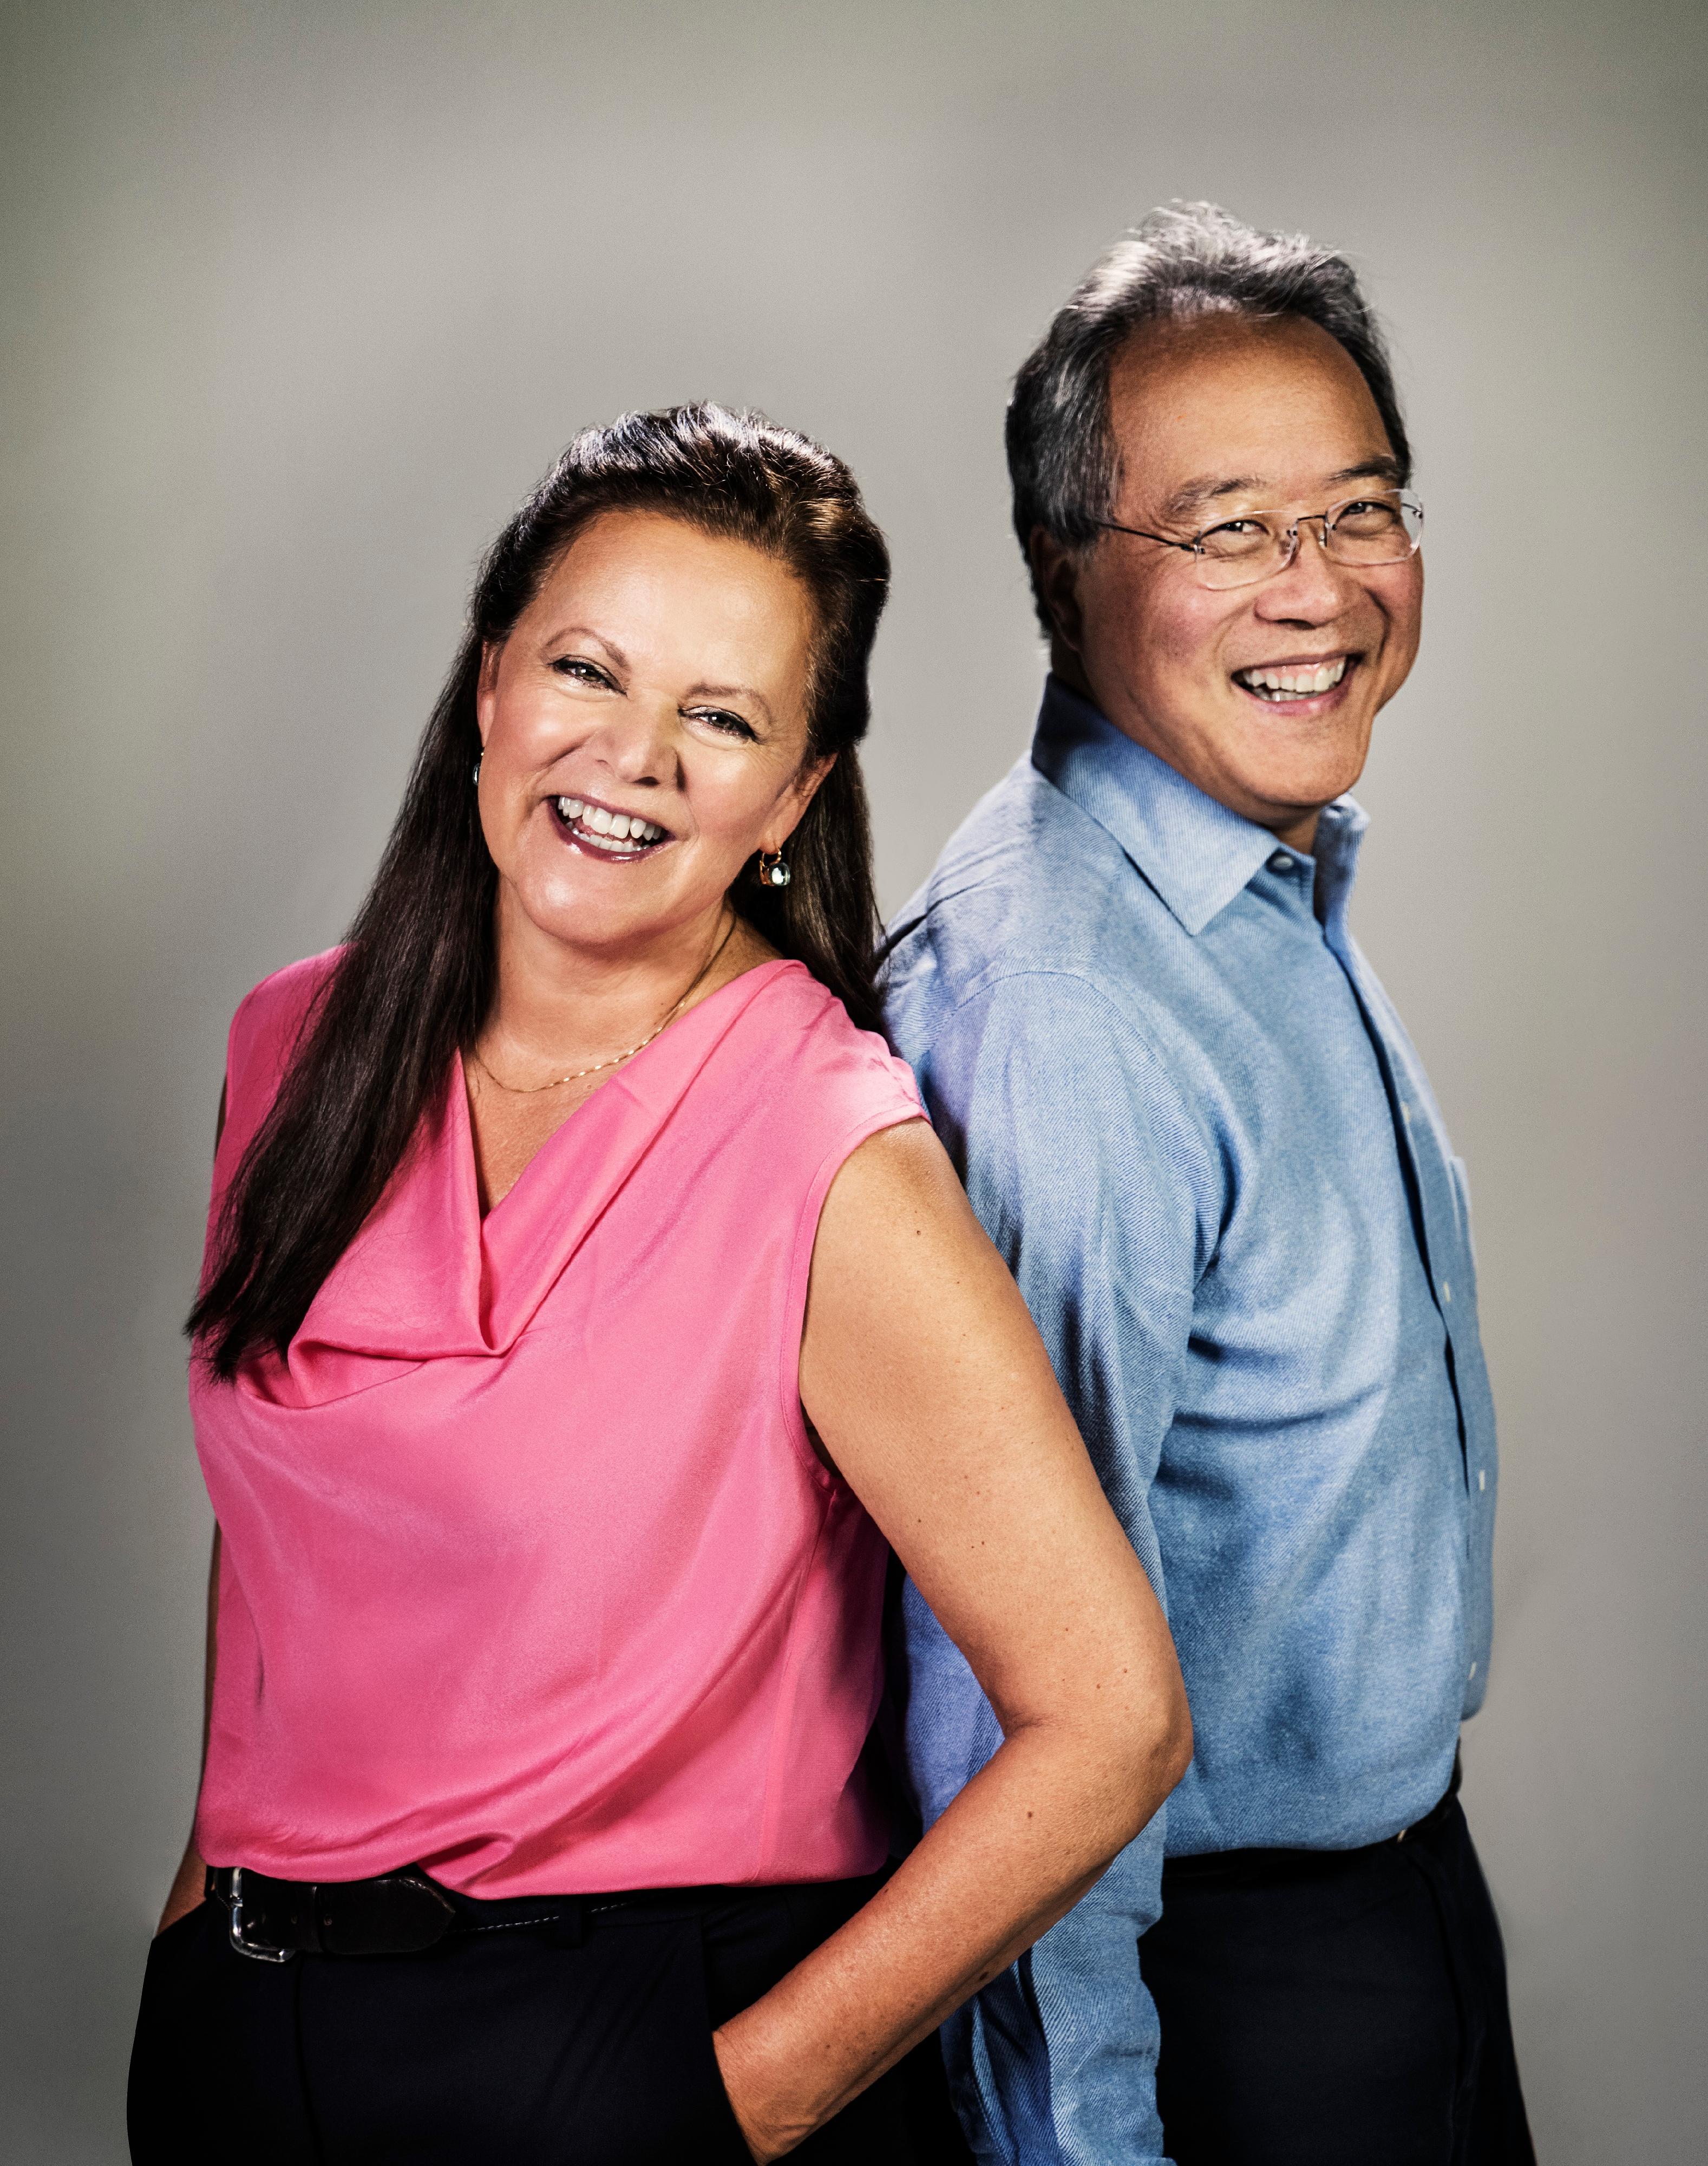 World-renowned cellist Yo-Yo Ma and pianist Kathryn Stott will stage a recital on November 6 for the Great Music 2023 of the Leisure and Cultural Services Department. Photo shows Ma (right) and Stott (left). (Source of photo: Mark Mann)